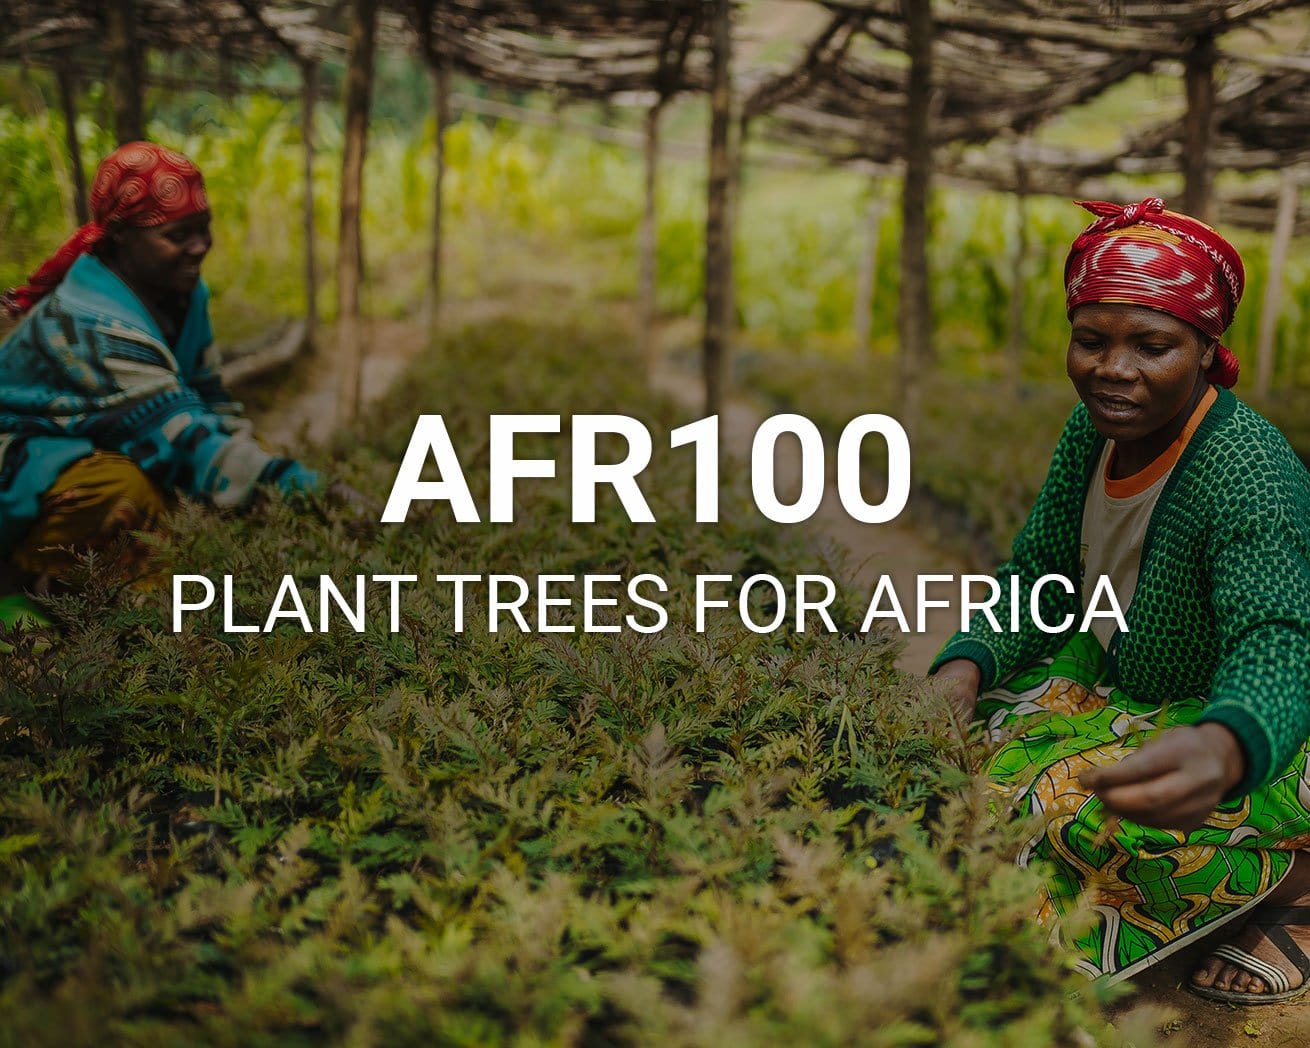 AFR100: Plant Trees for Africa